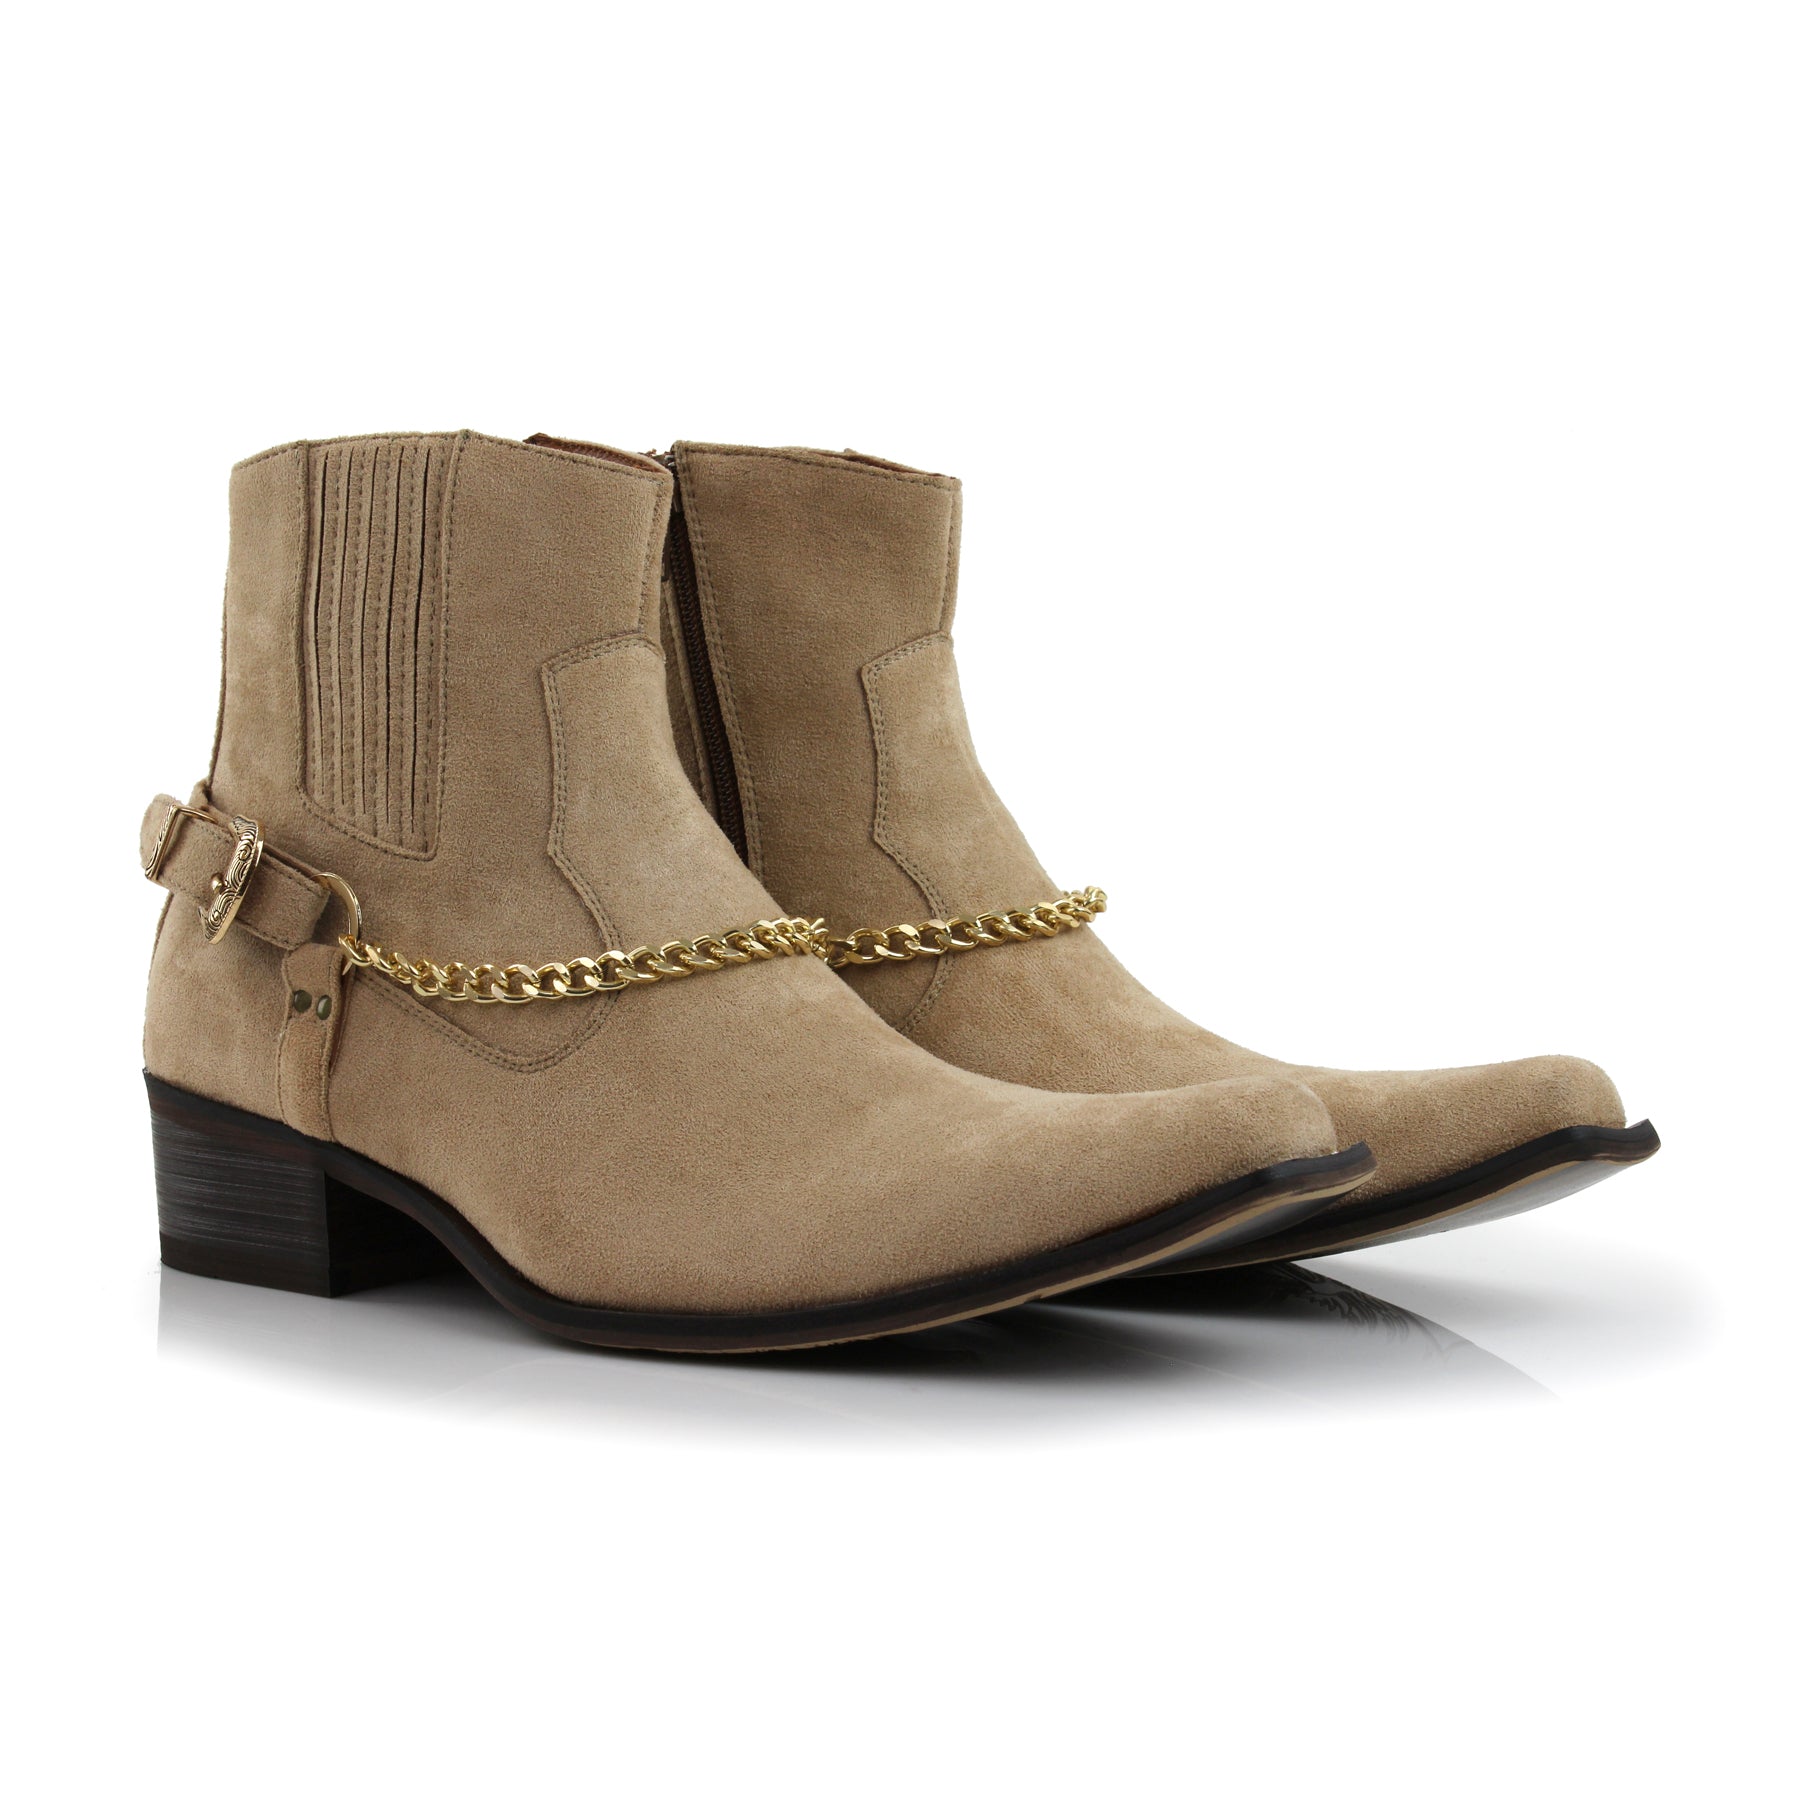 Suede Cowboy Boots | Reyes by Ferro Aldo | Conal Footwear | Paired Angle View